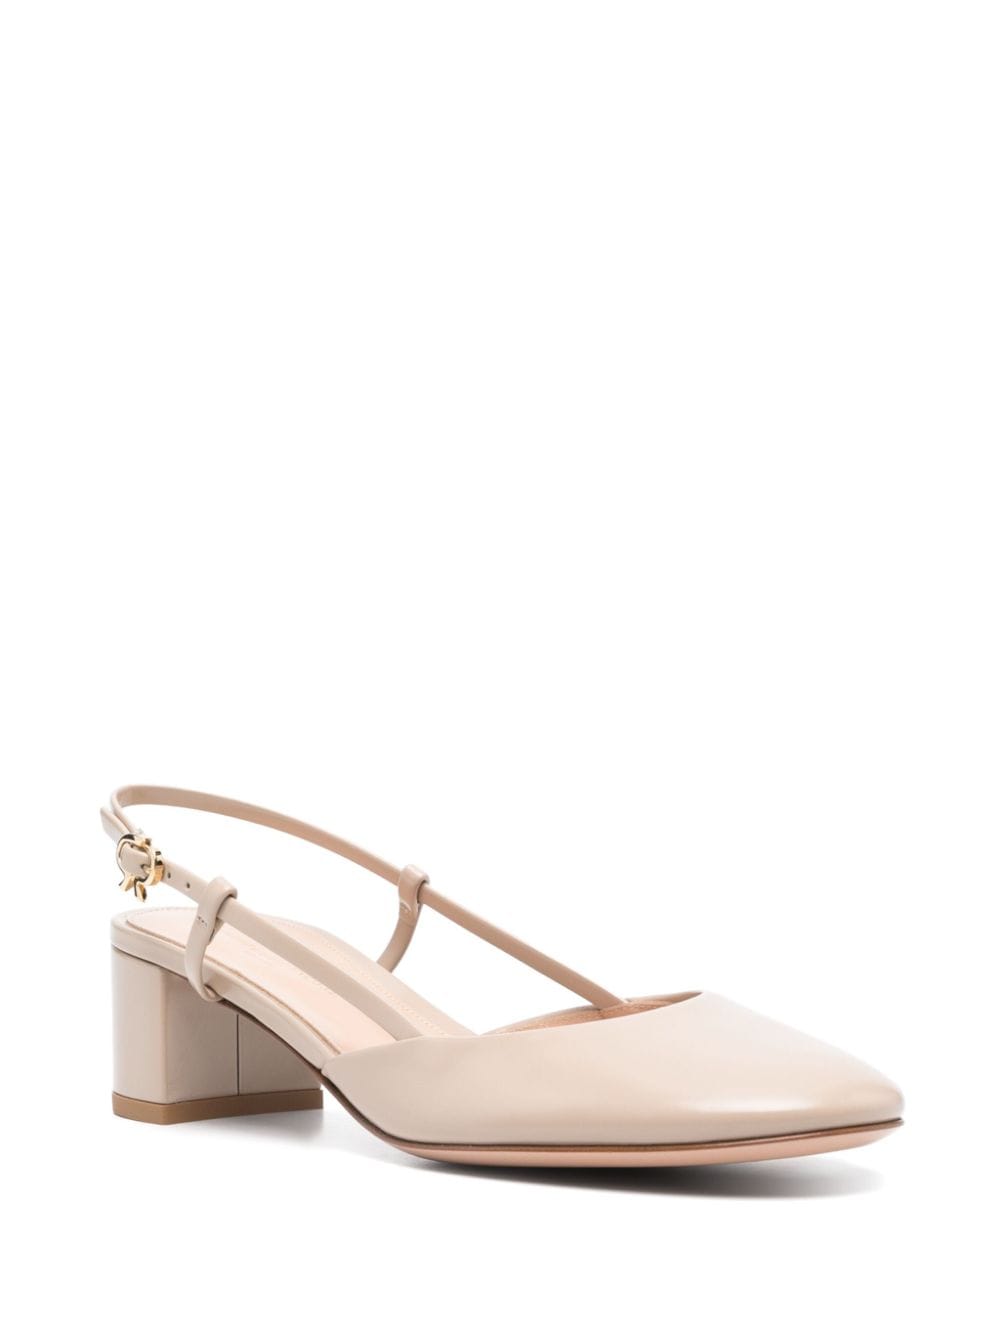 Gianvito Rossi slingback leather pumps - Beige